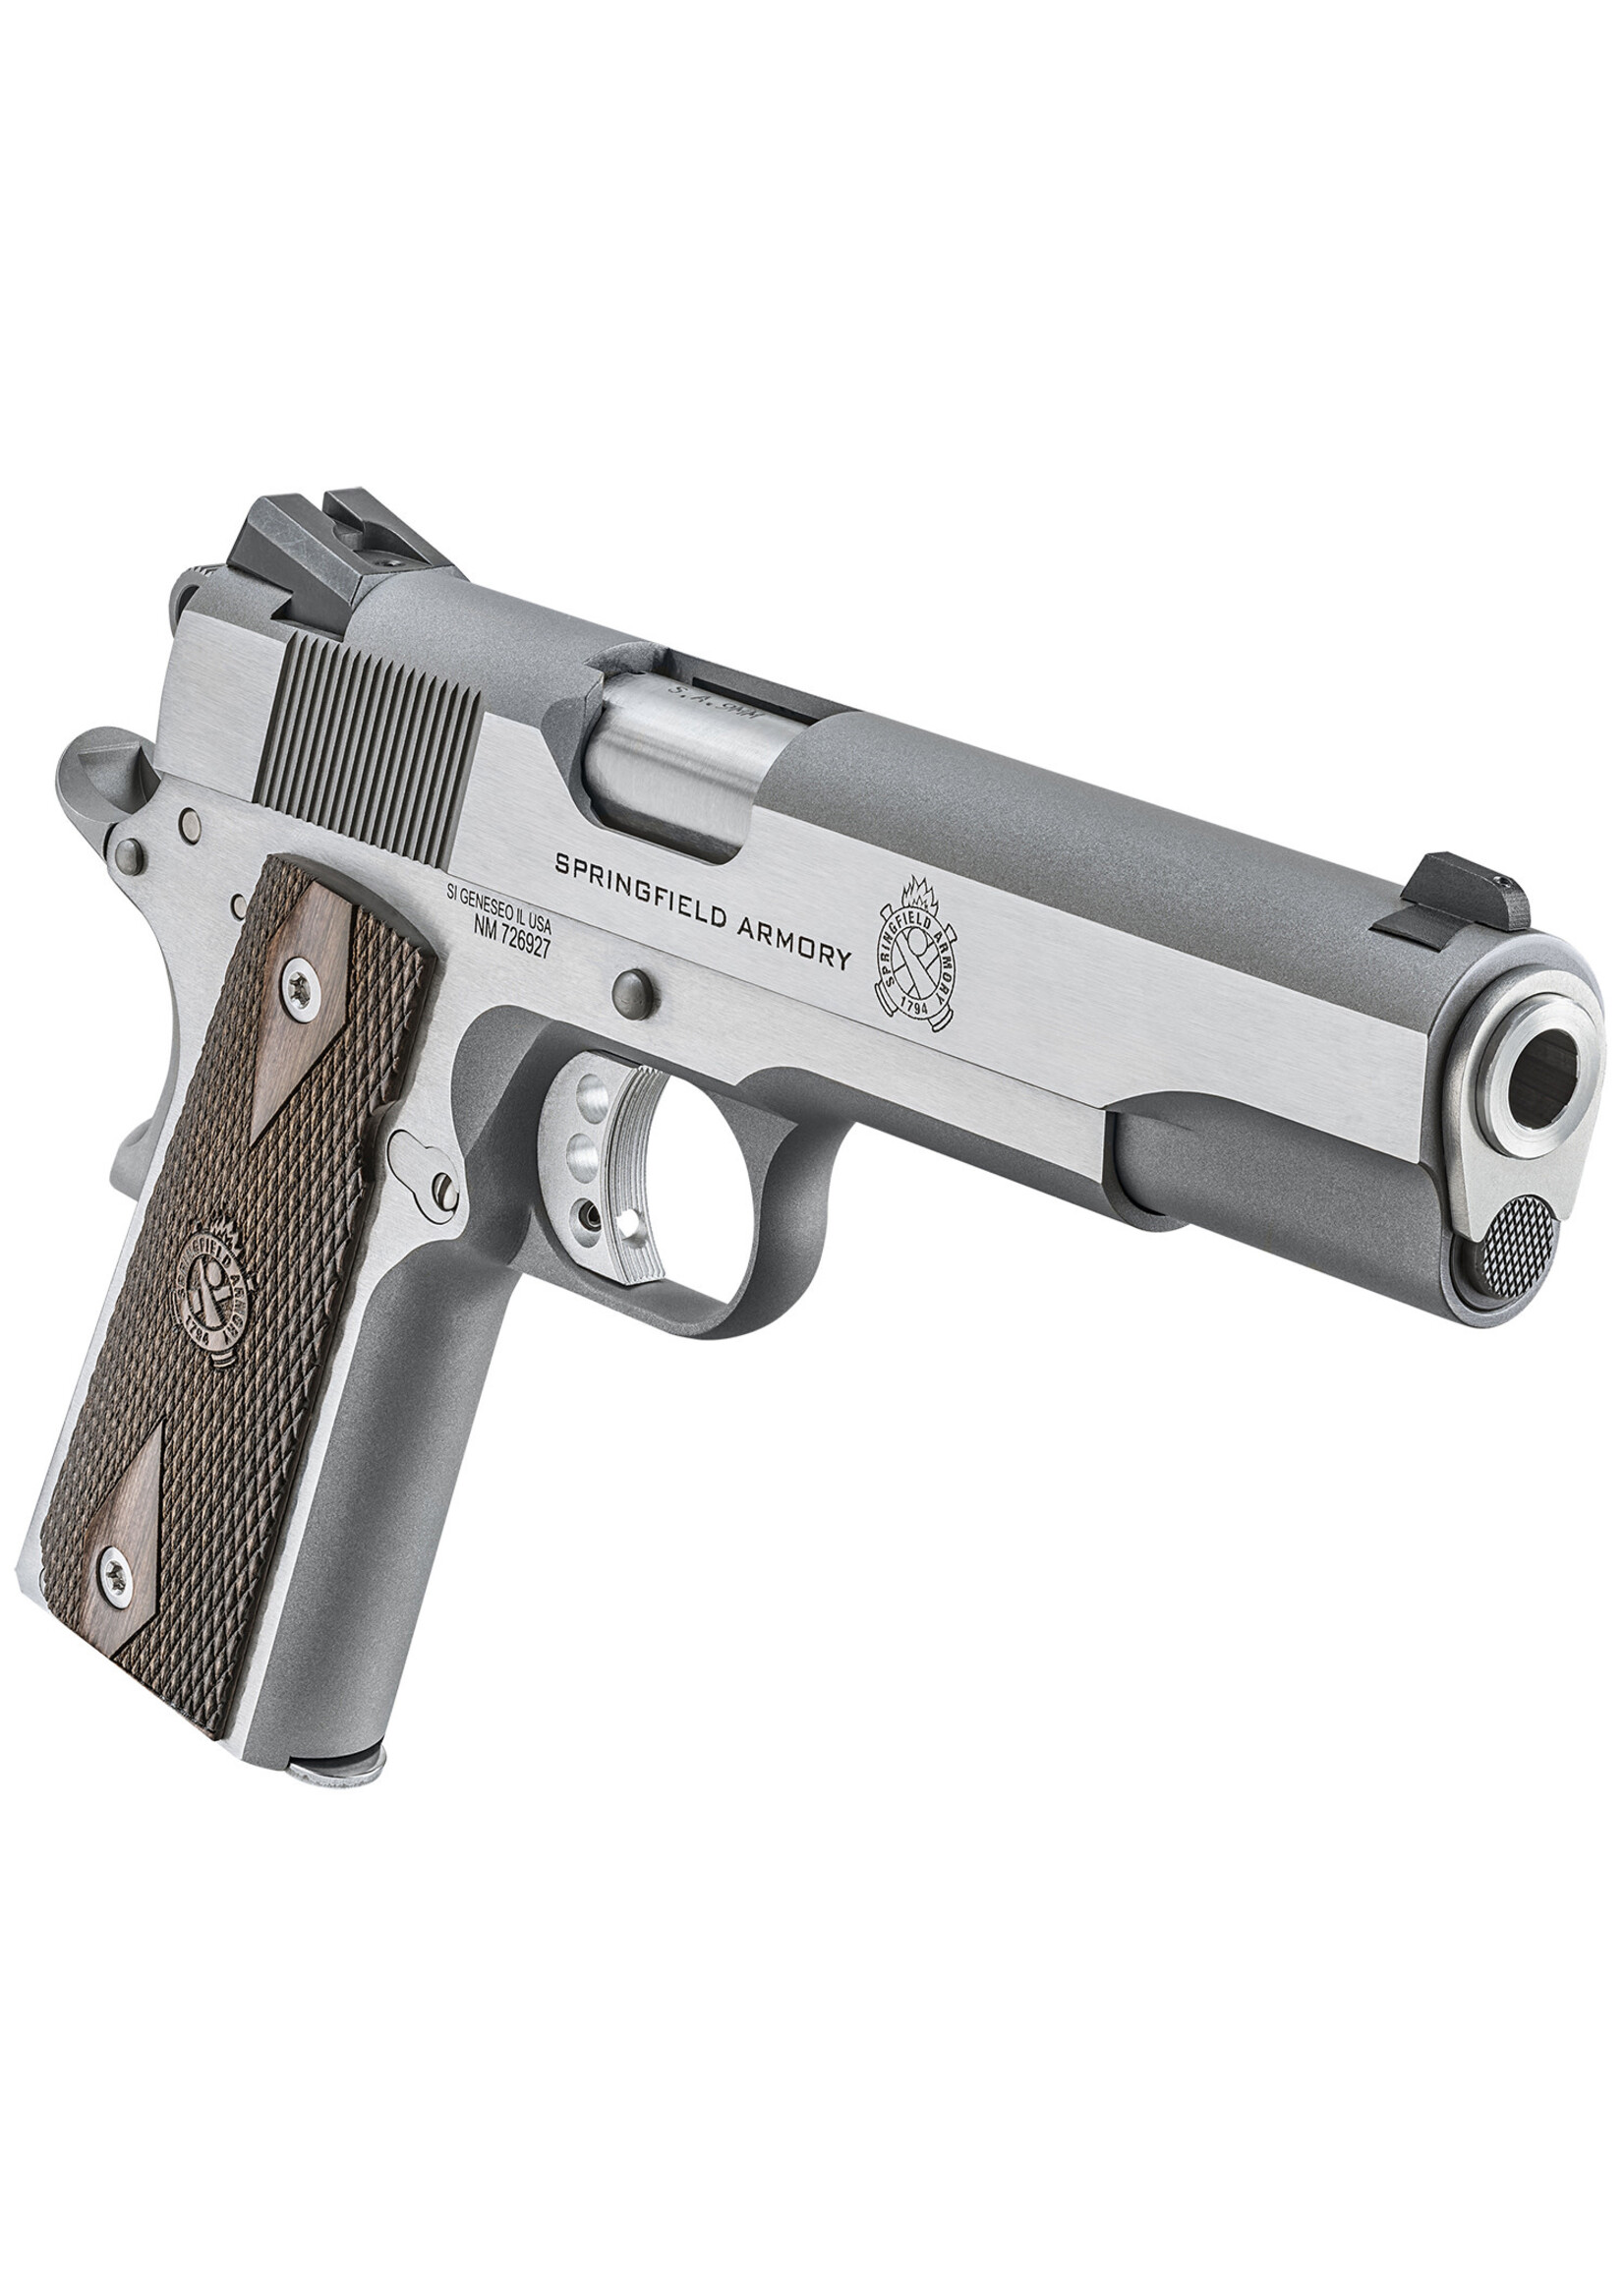 Springfield Armory Springfield Armory PX9419S 1911 Garrison 9mm Luger 9+1 5" Barrel, Matte Rust-Resistant Stainless Steel Frame w/Beavertail, Serrated Slide, Thin-Line Wood Grips Feature Double-Diamond Pattern & Crossed Cannon Logo